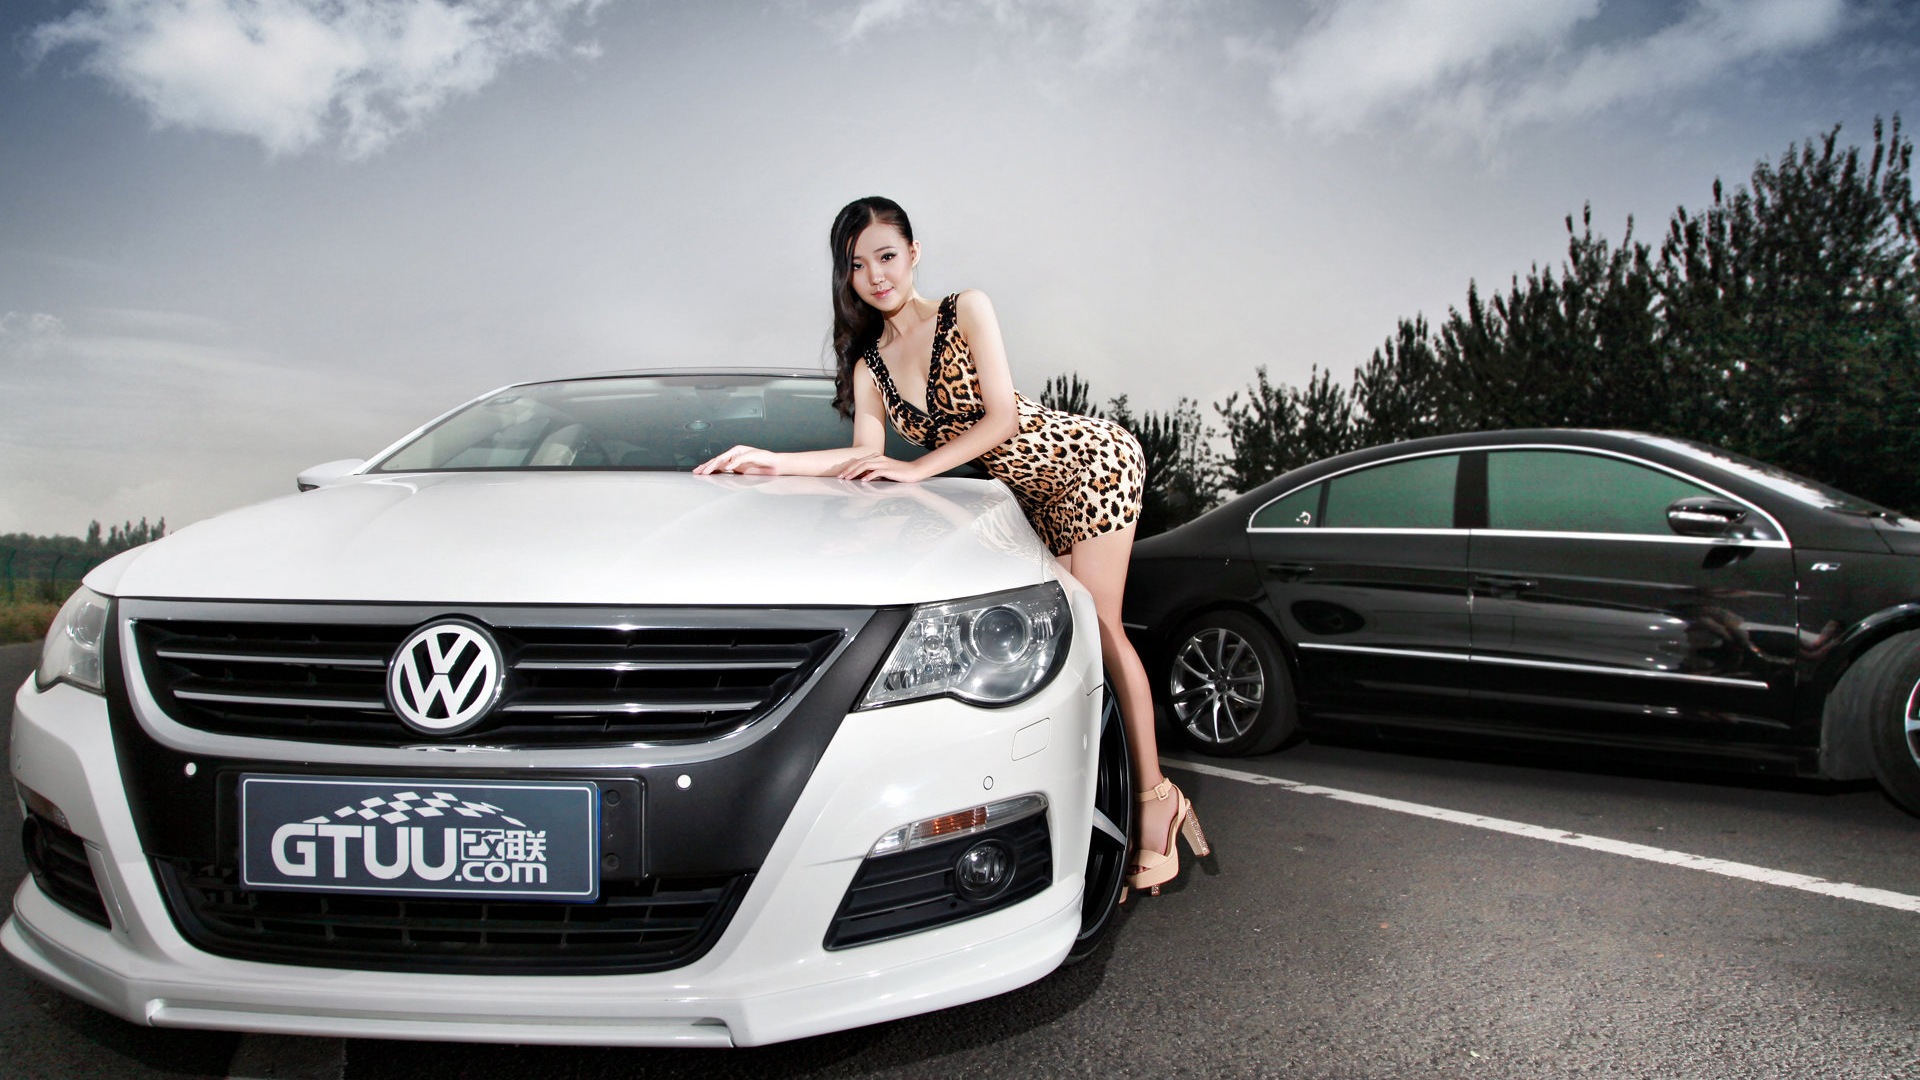 Beautiful leopard dress girl with Volkswagen sports car wallpapers #10 - 1920x1080